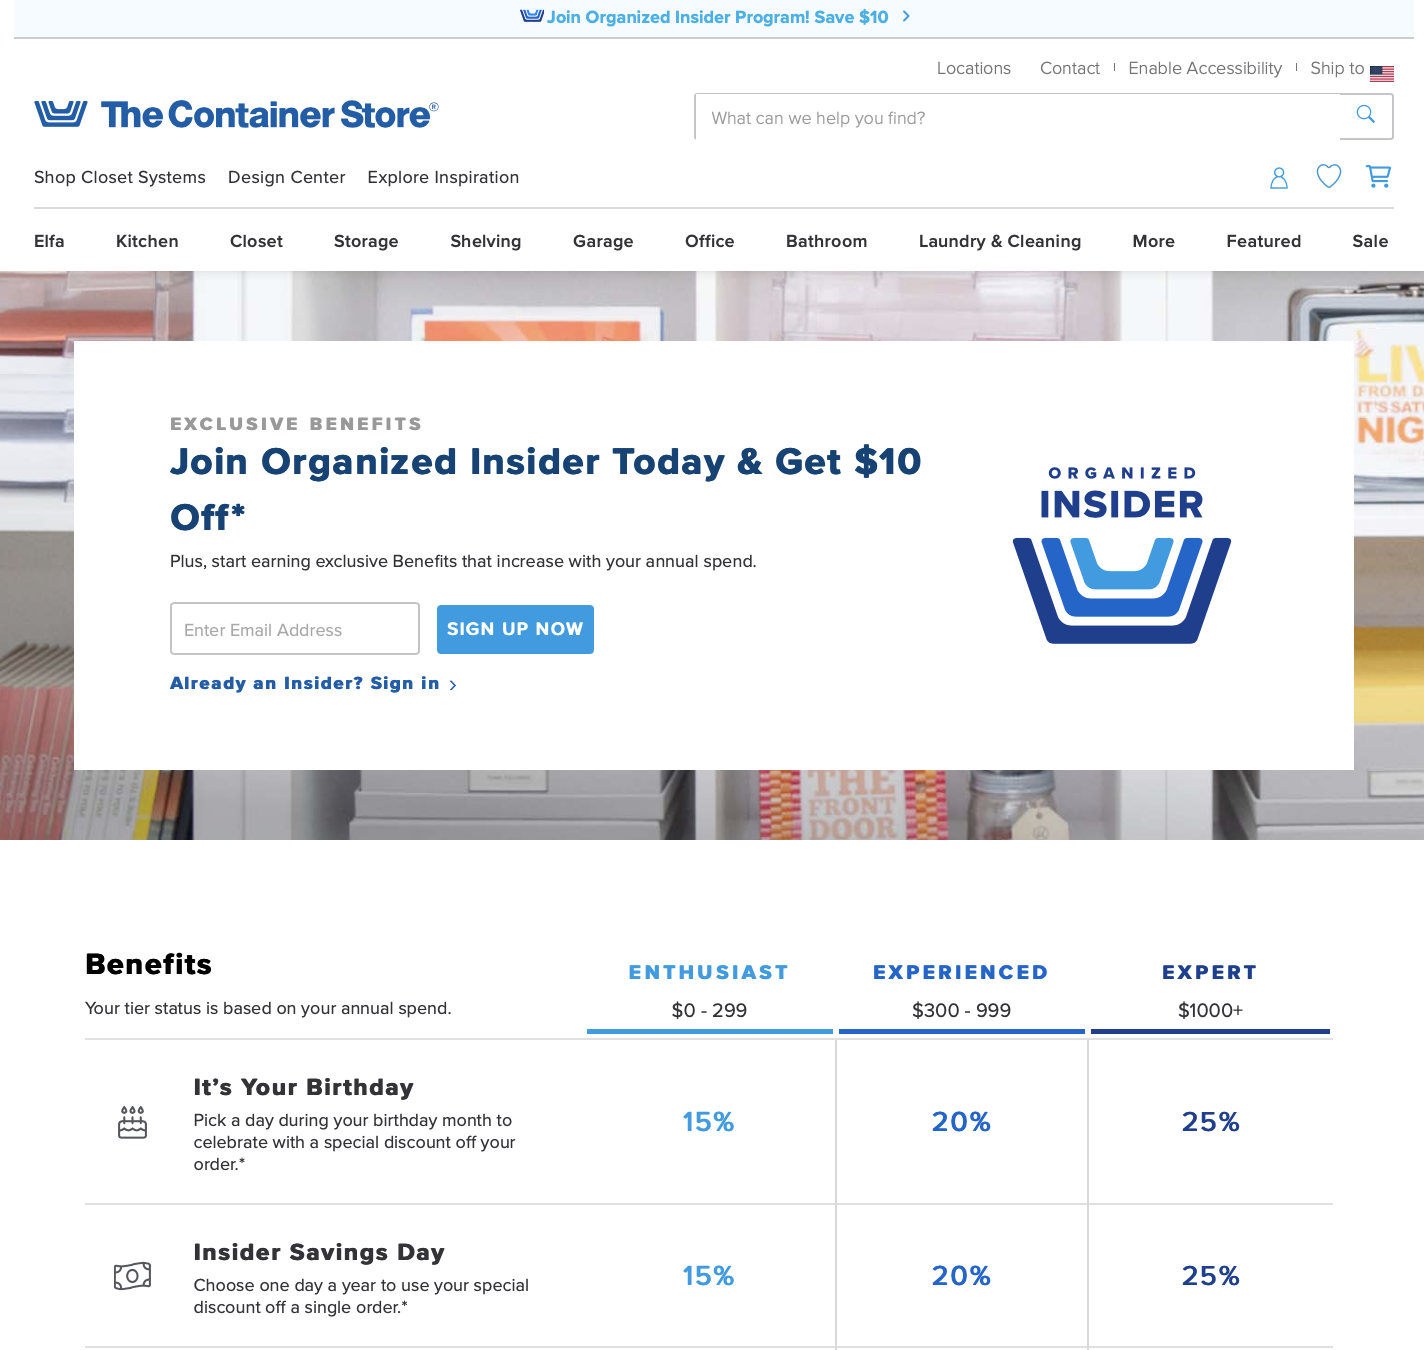 The container store loyalty program